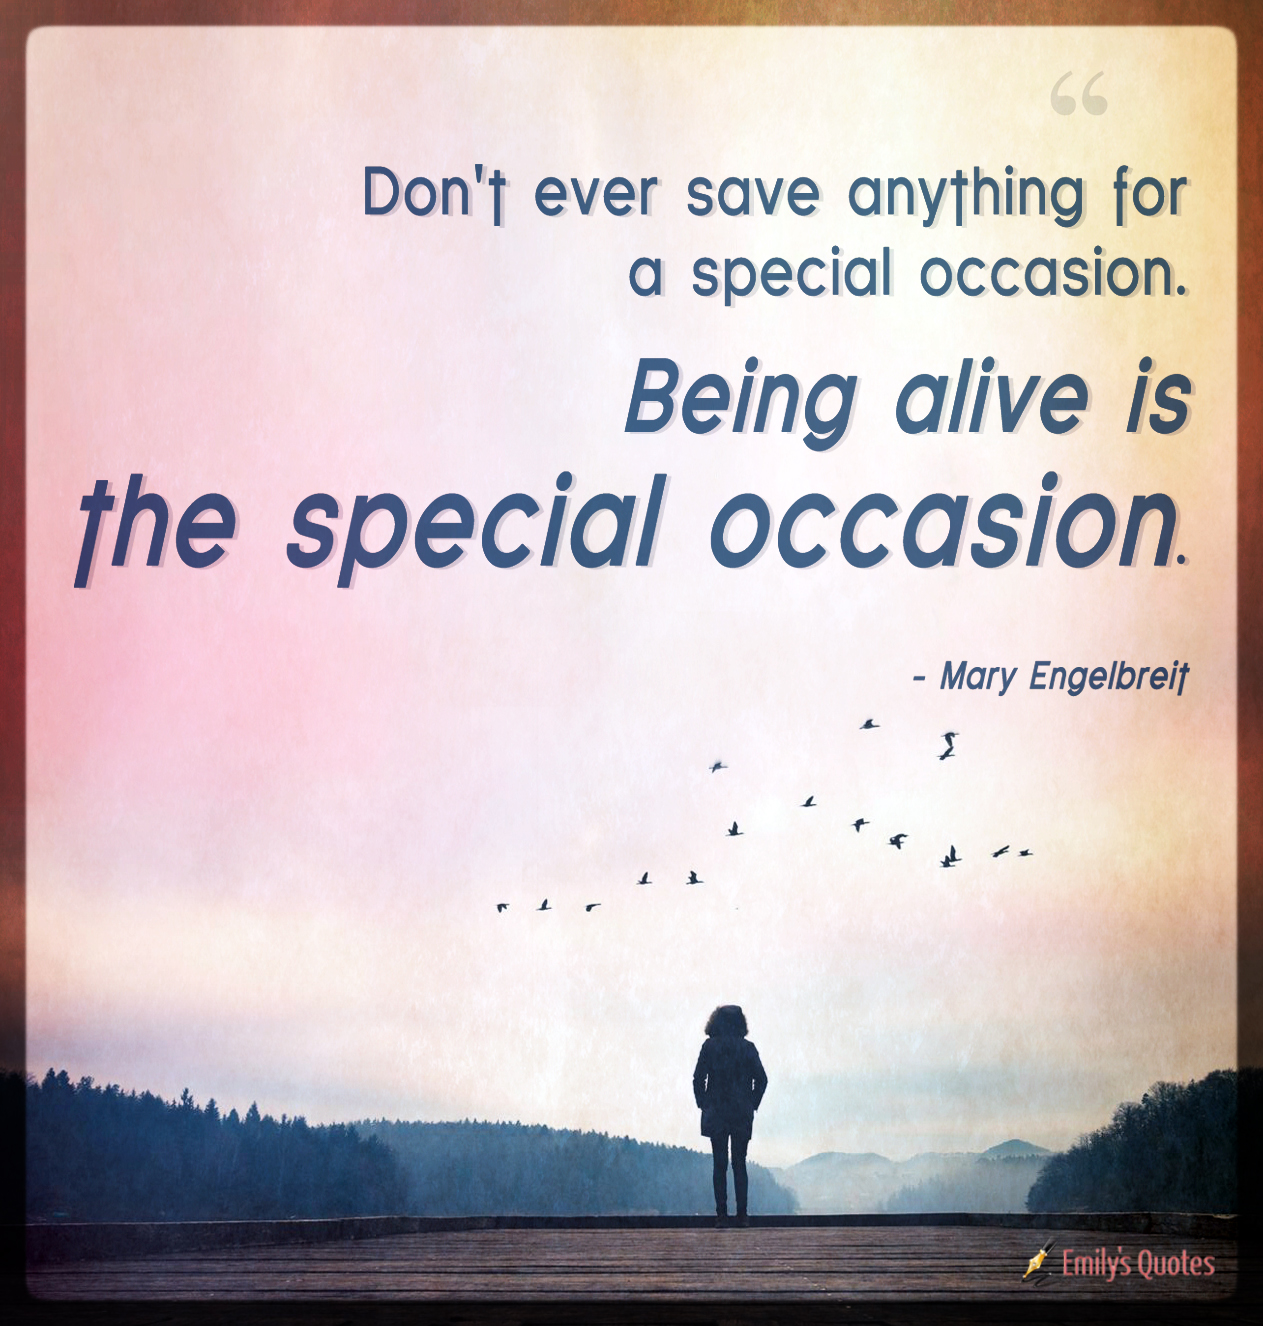 Don’t ever save anything for a special occasion. Being alive is the special occasion